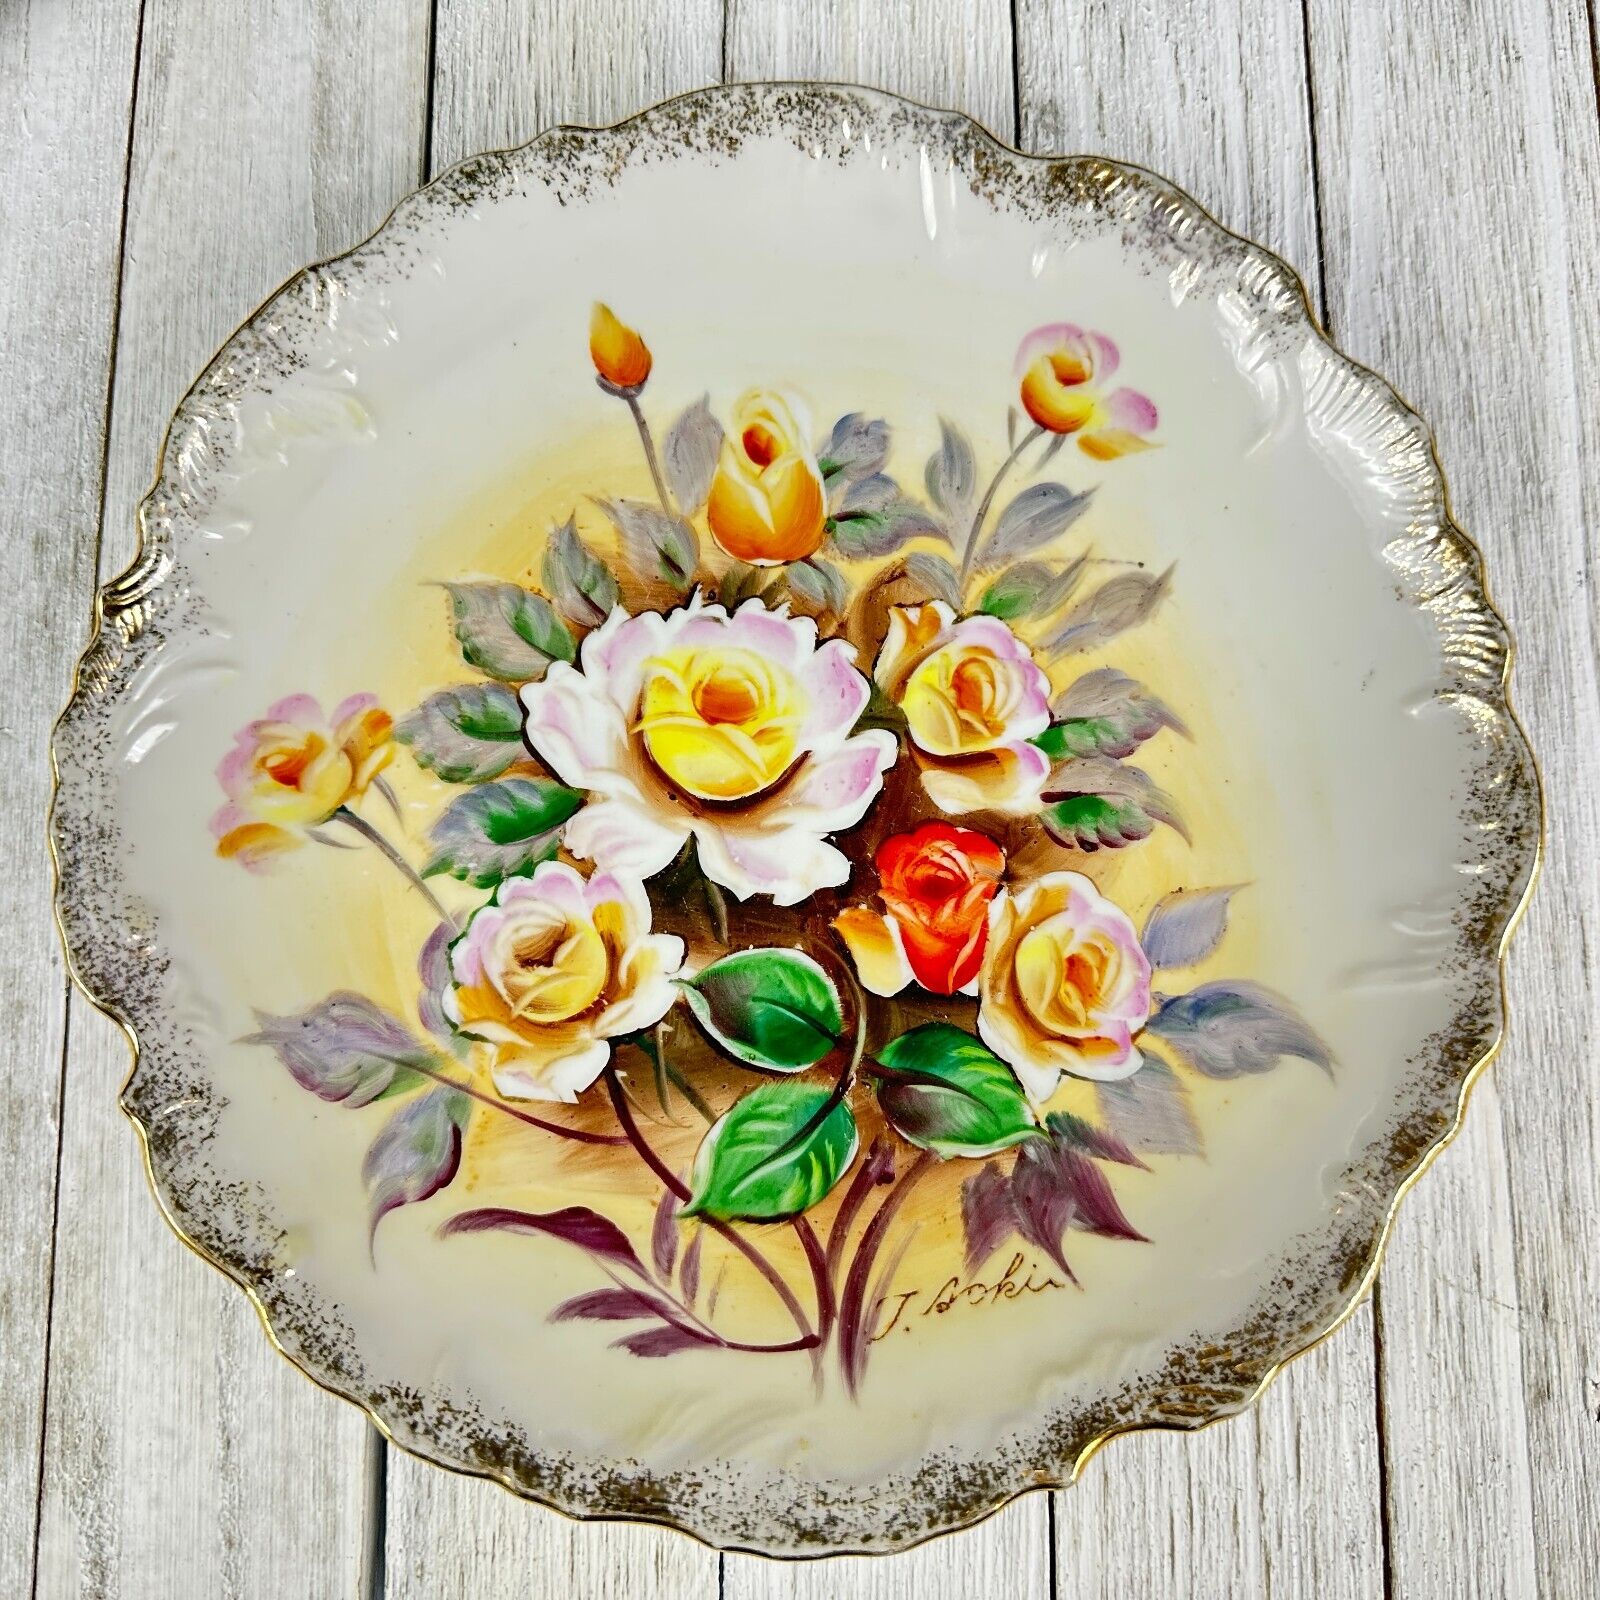 VTG Antique Hand Painted Plate Signed Floral Yellow Pink Rose Flower Warmth &Joy